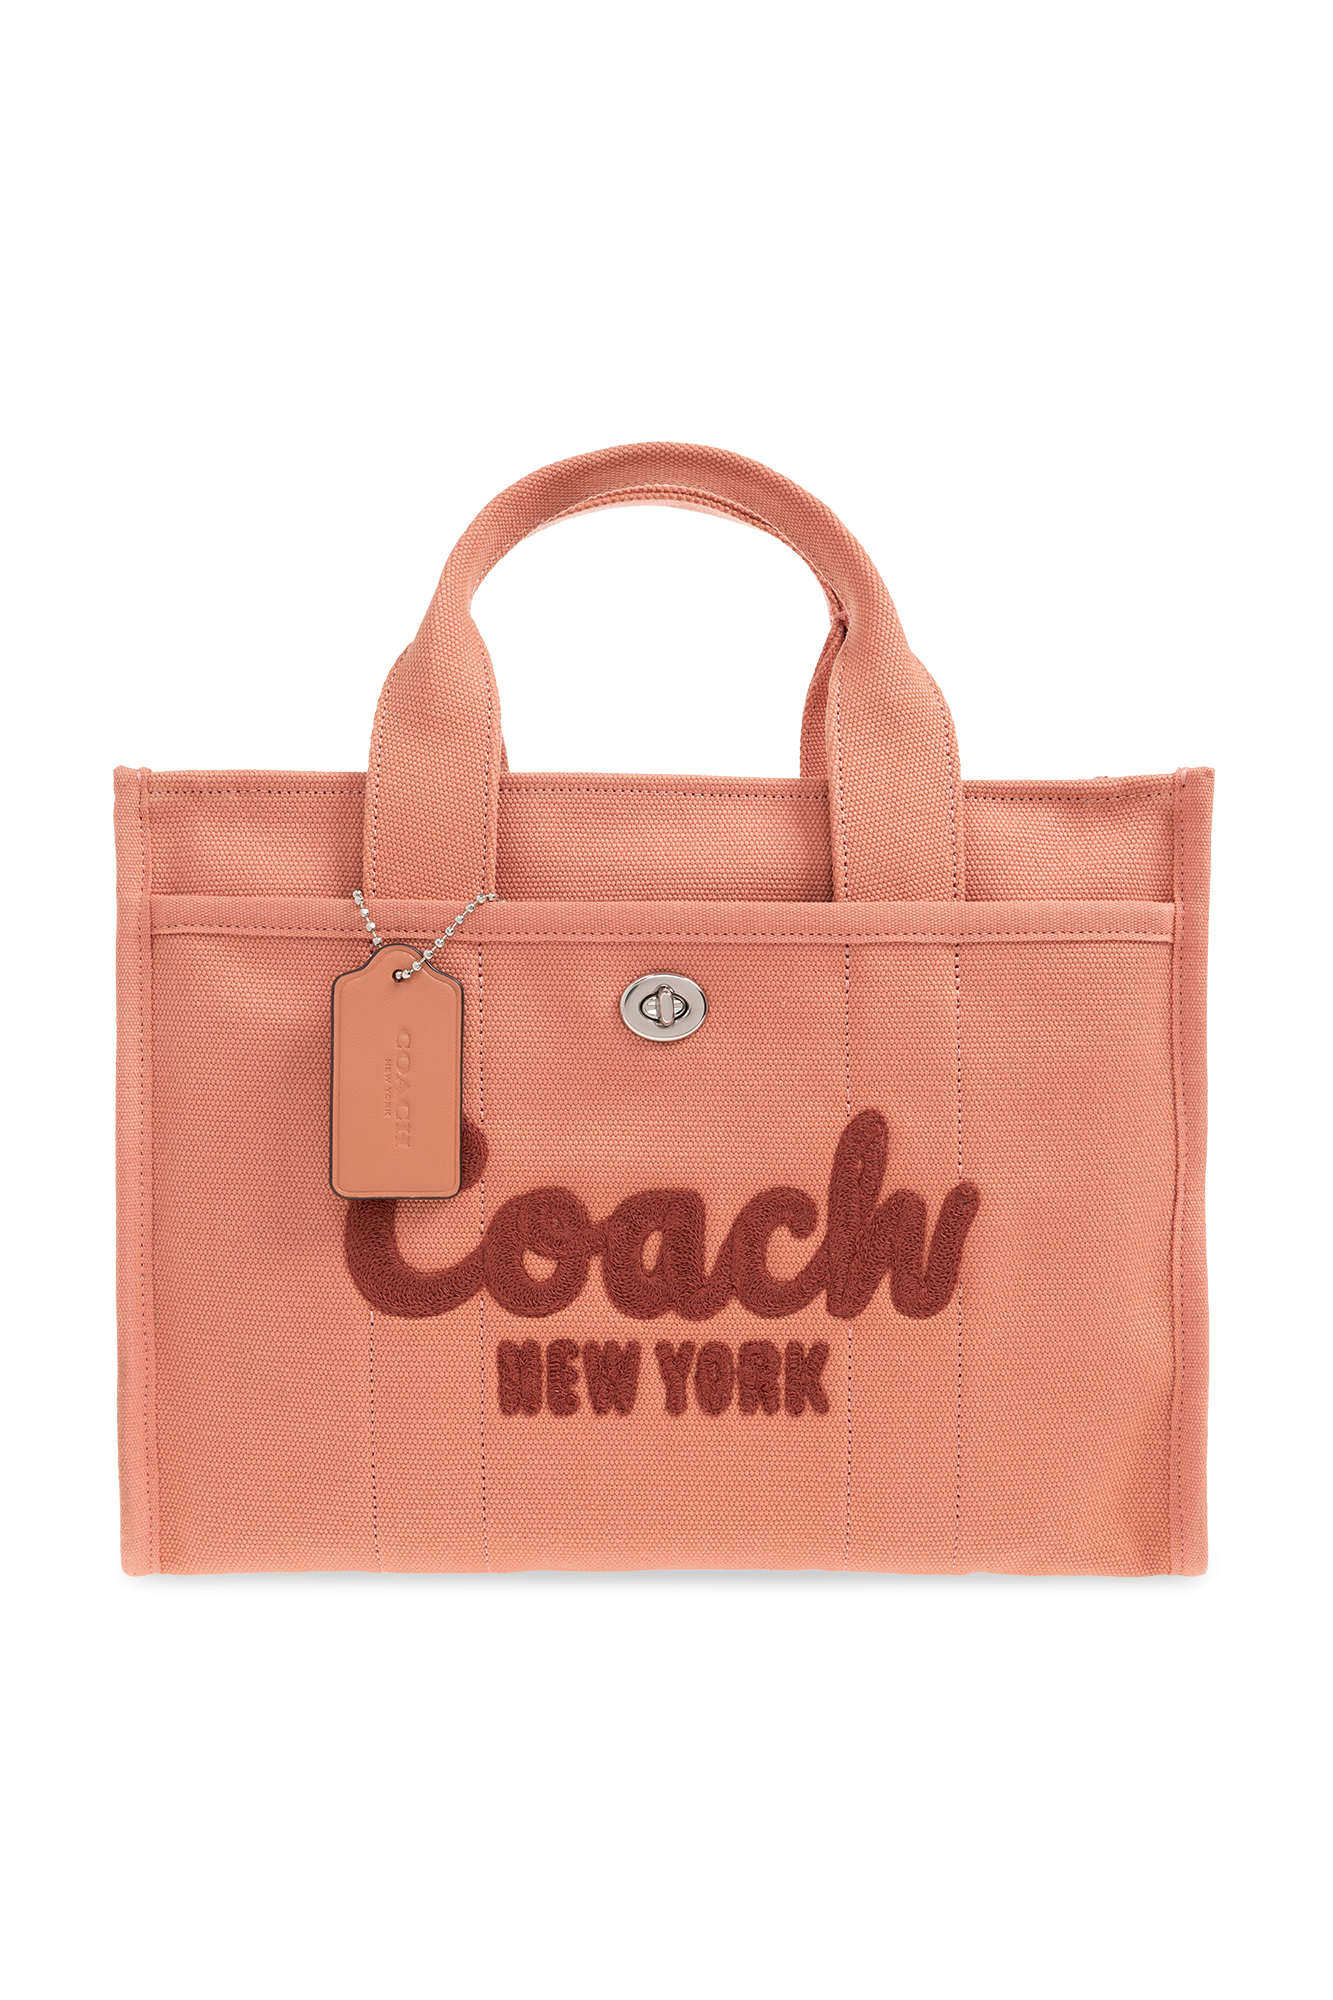 Coach Resort 2018 Collection